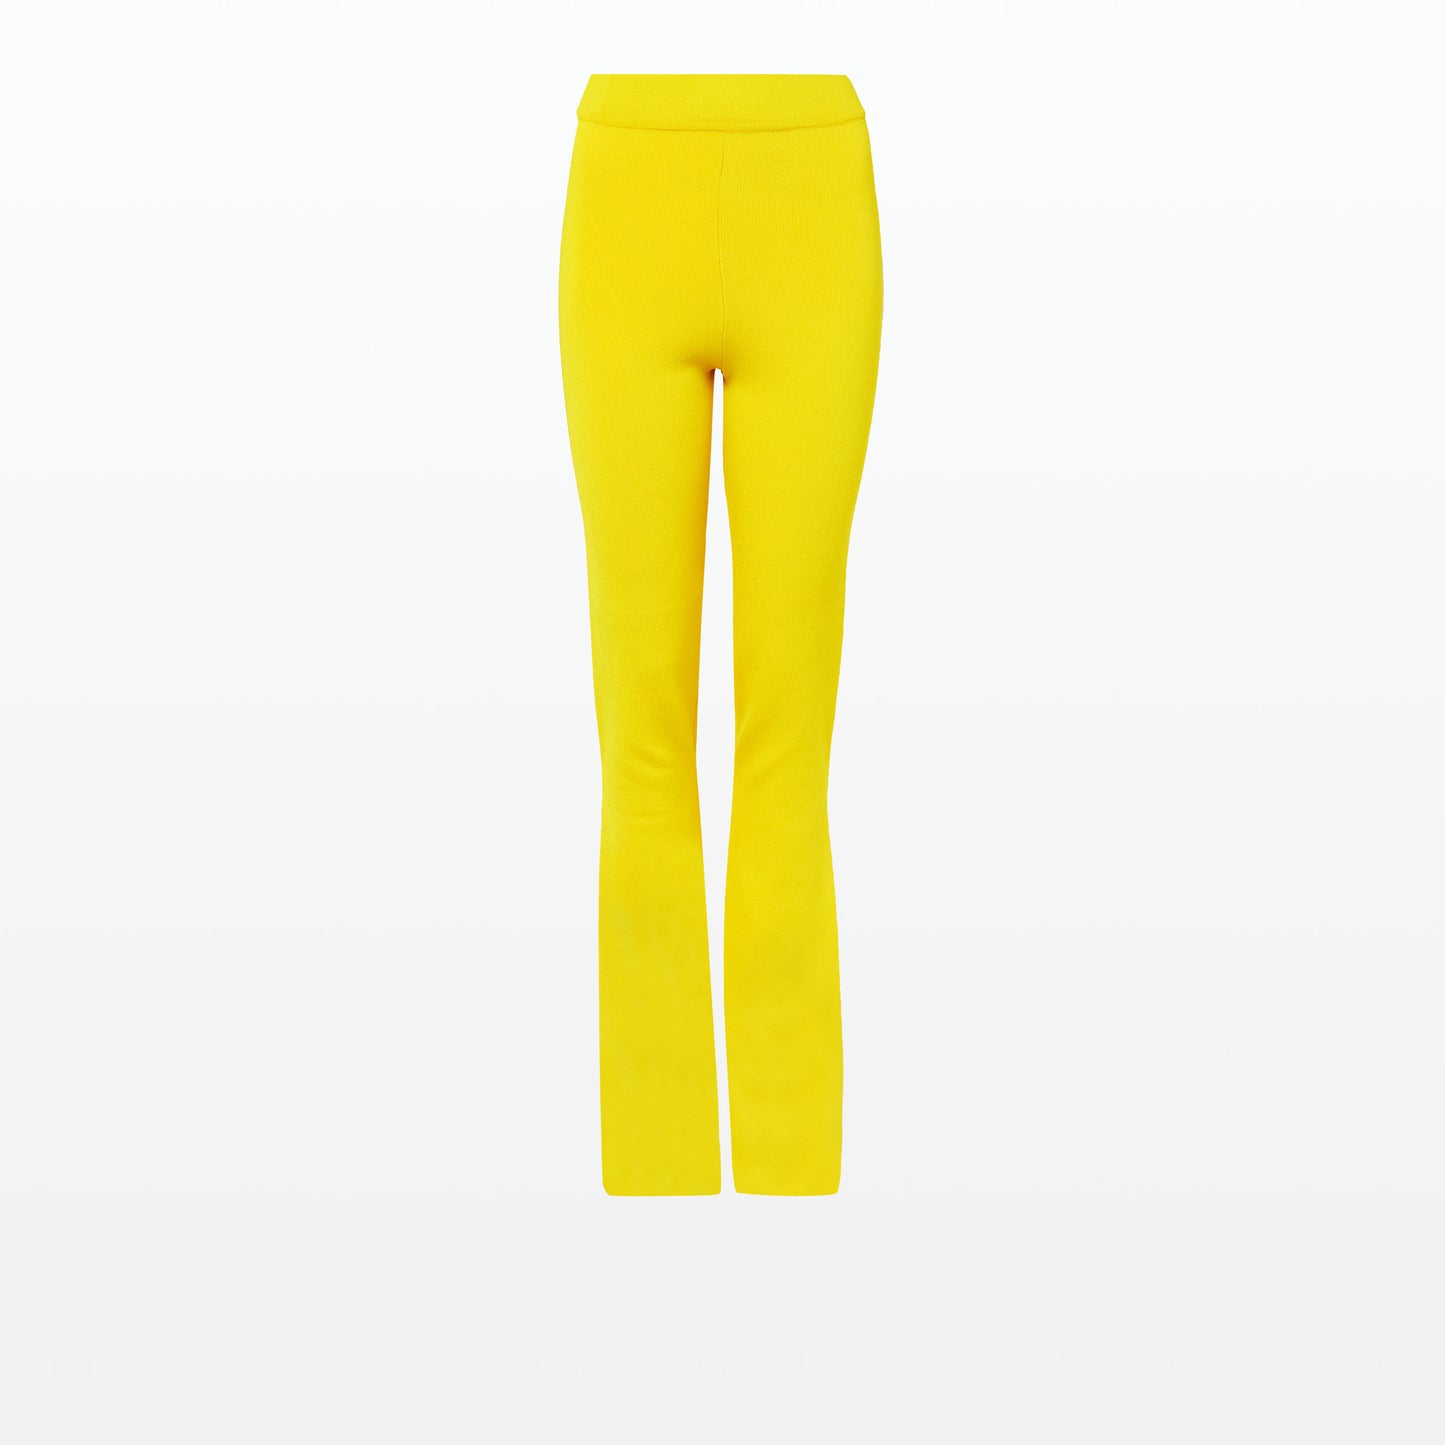 Khuno Canary Knit Trousers